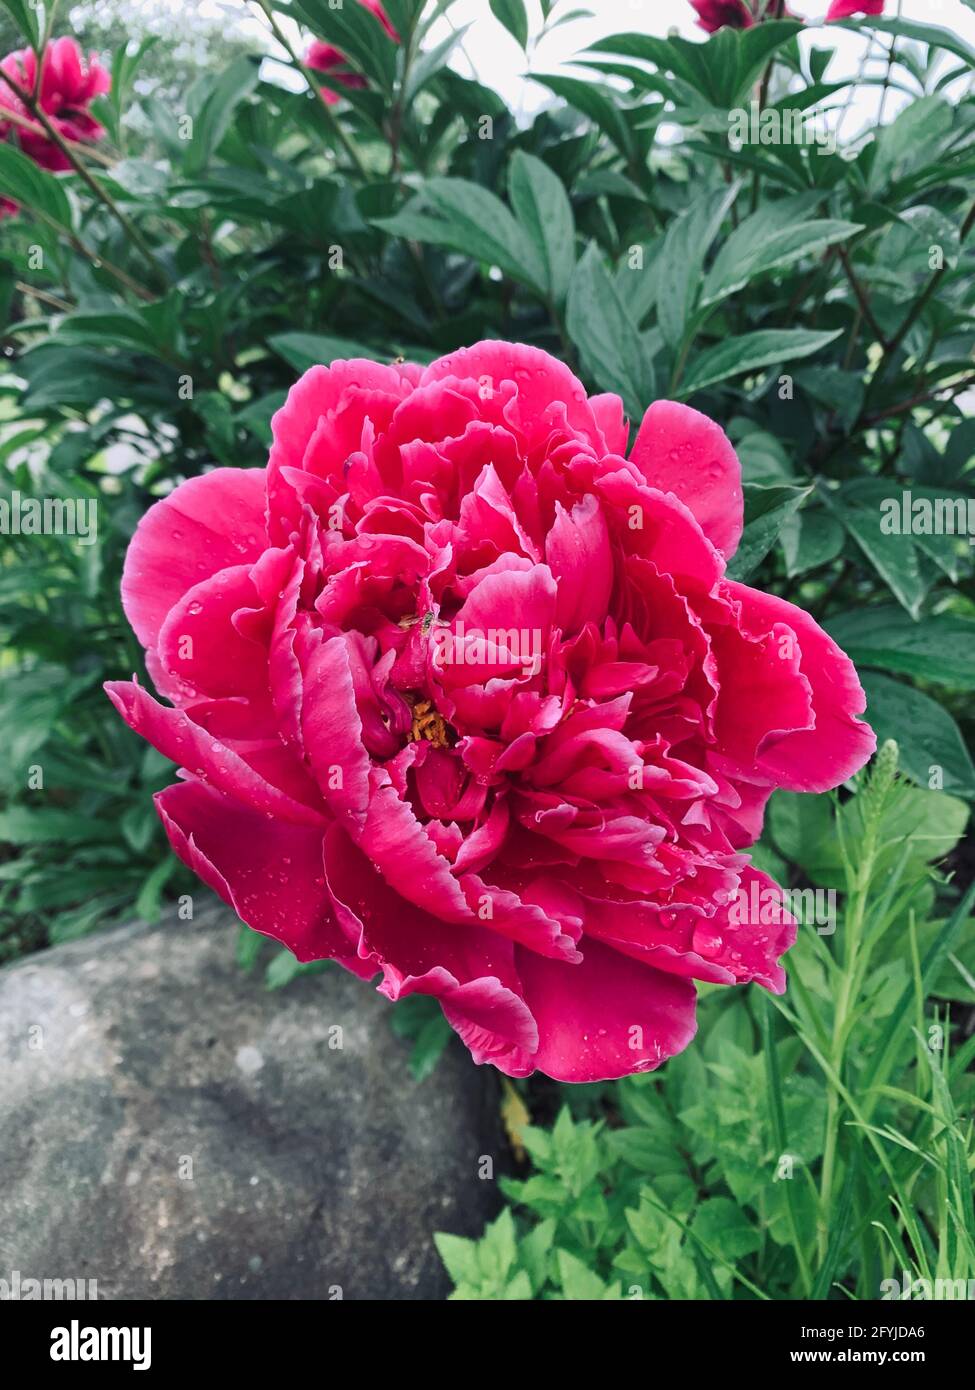 Still shot of magenta peony with white tipped petals in garden Stock Photo